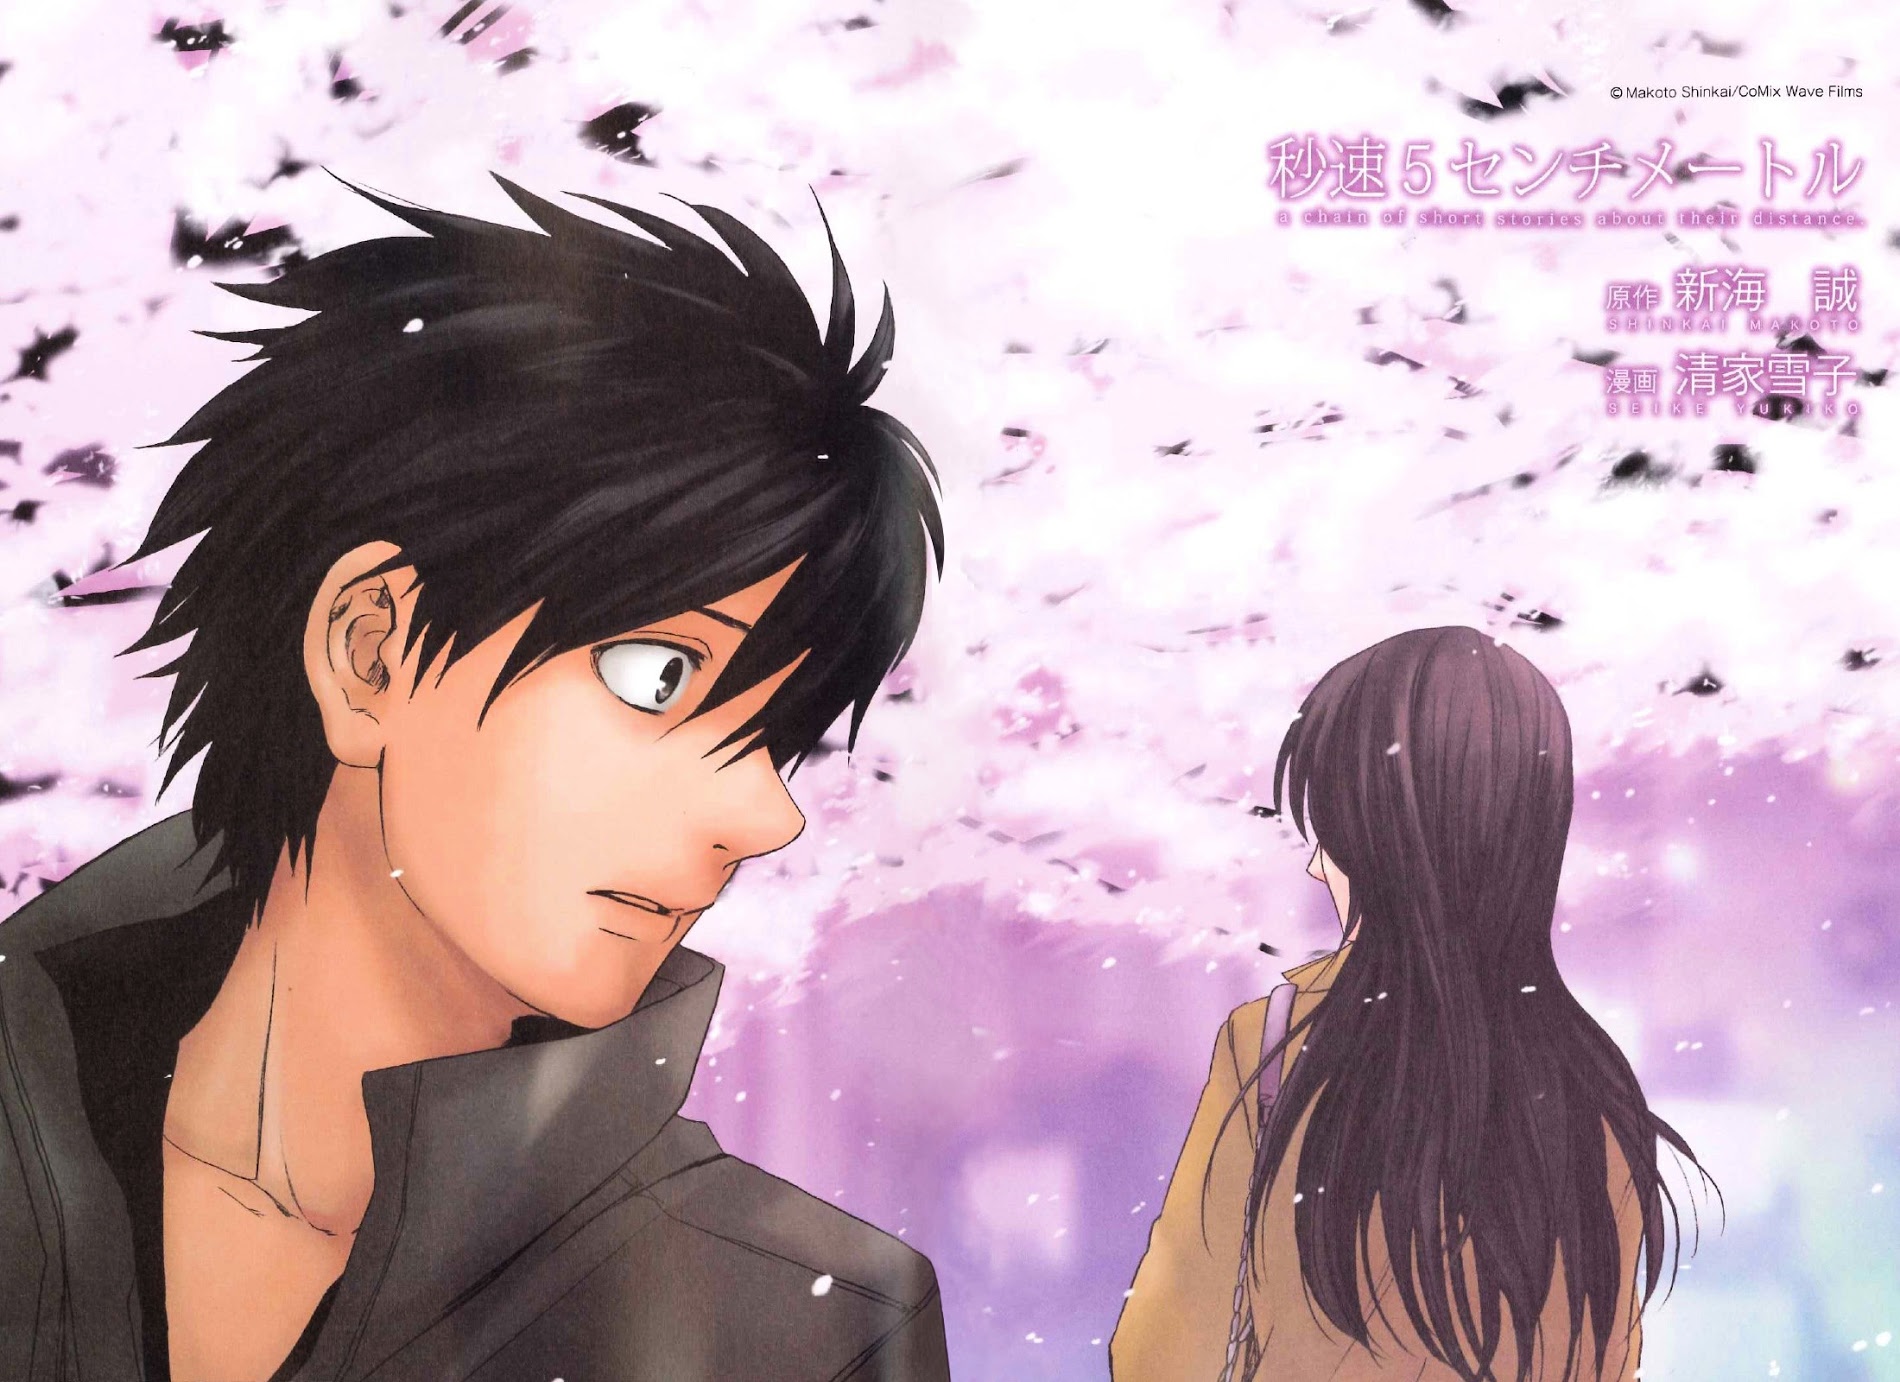 5 Centimeters Per Second png images | PNGEgg